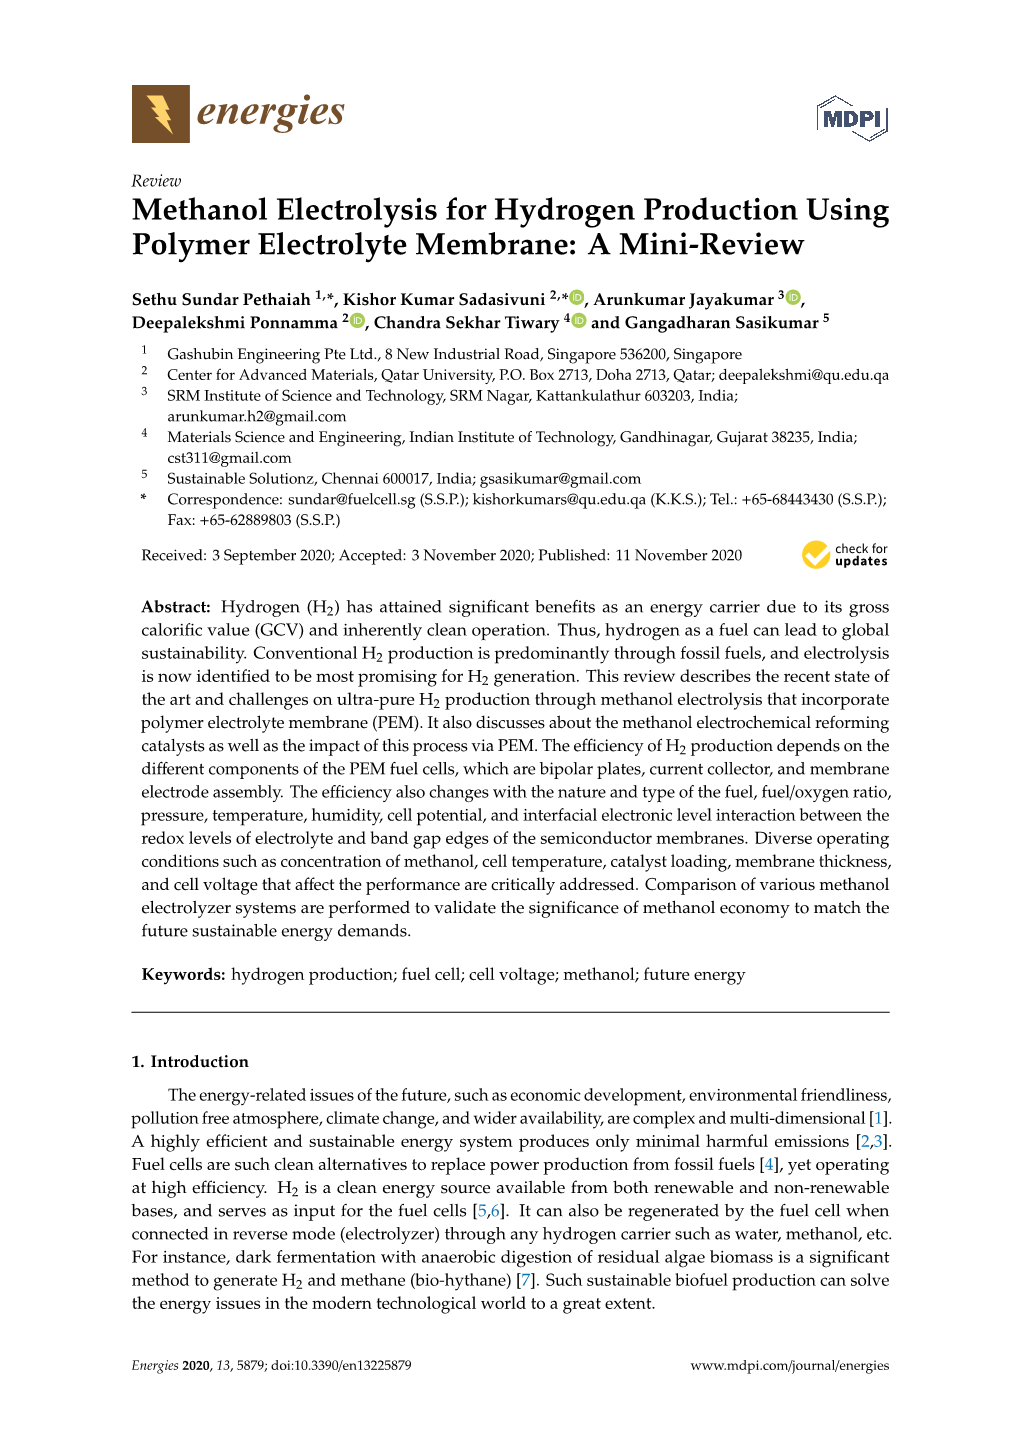 Methanol Electrolysis for Hydrogen Production Using Polymer Electrolyte Membrane: a Mini-Review